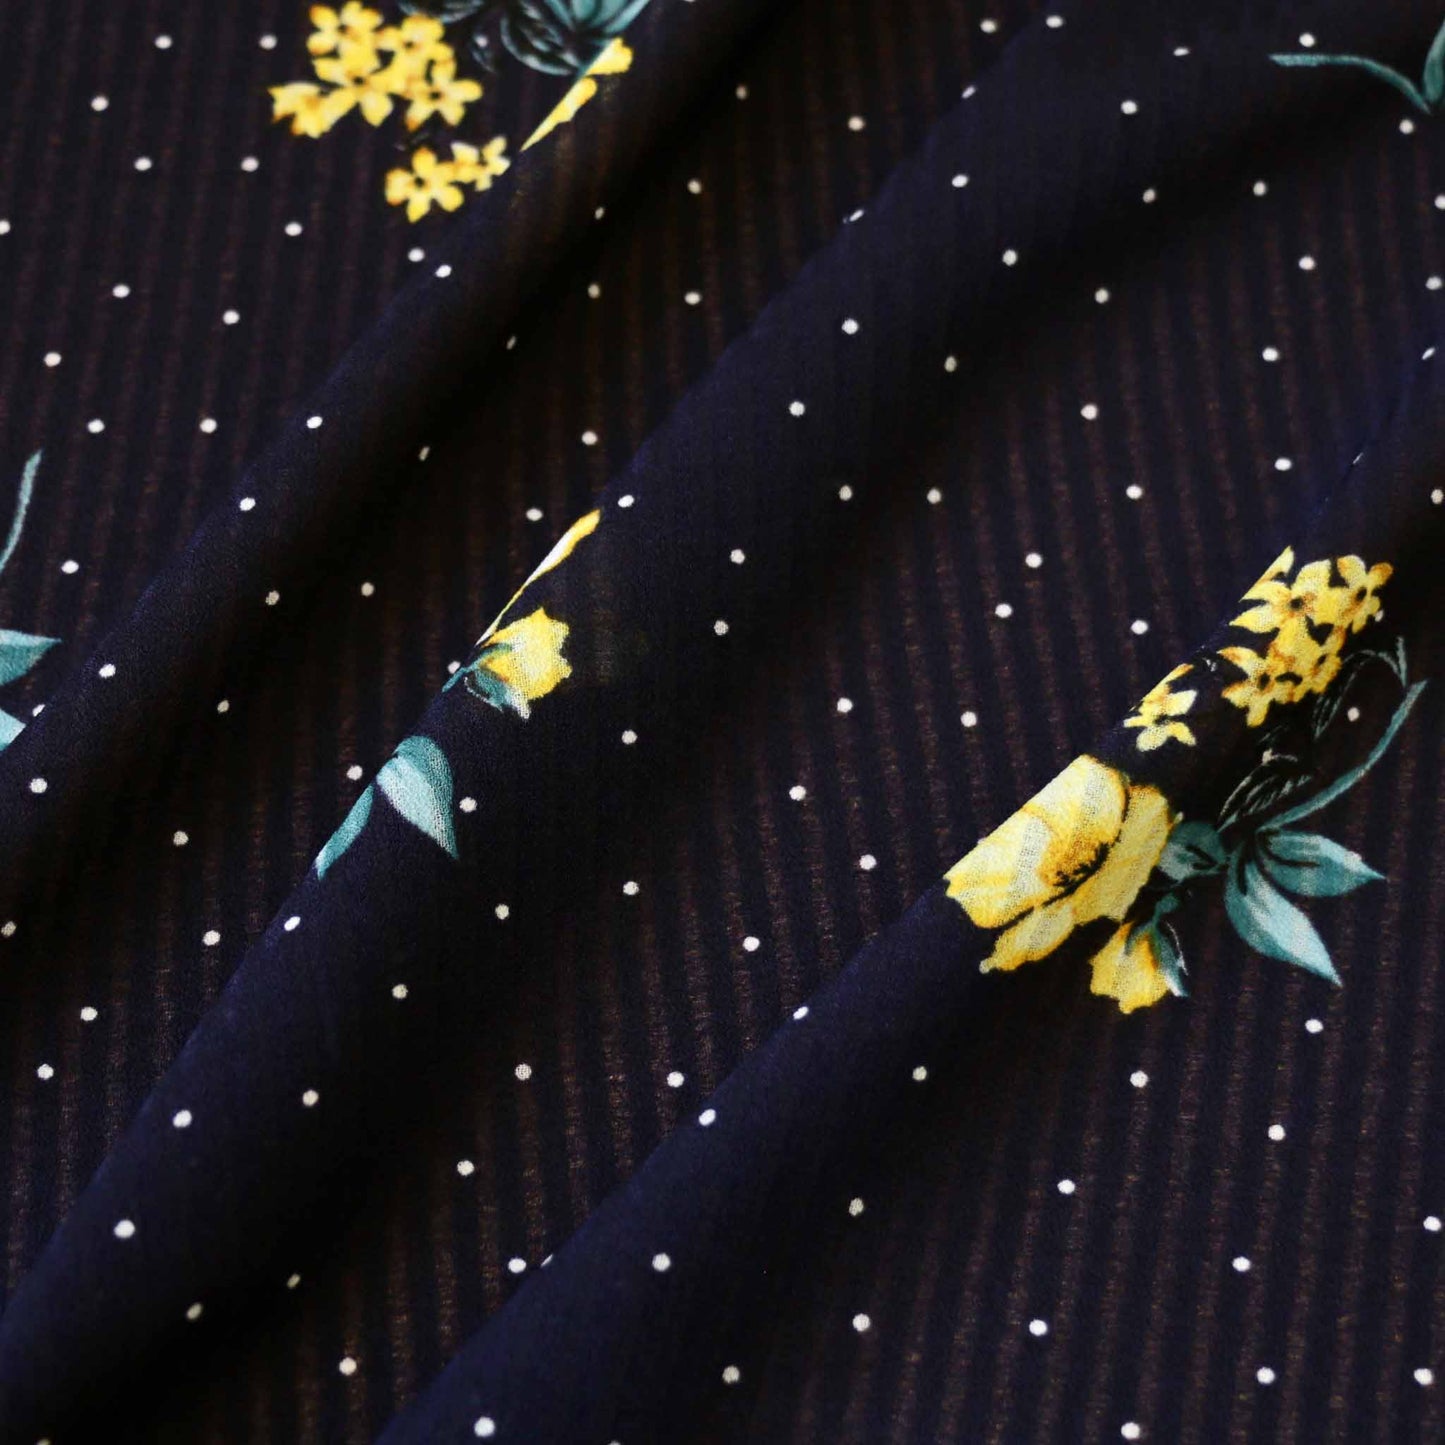 polka dot and floral print on navy blue georgette fabric with yellow flowers